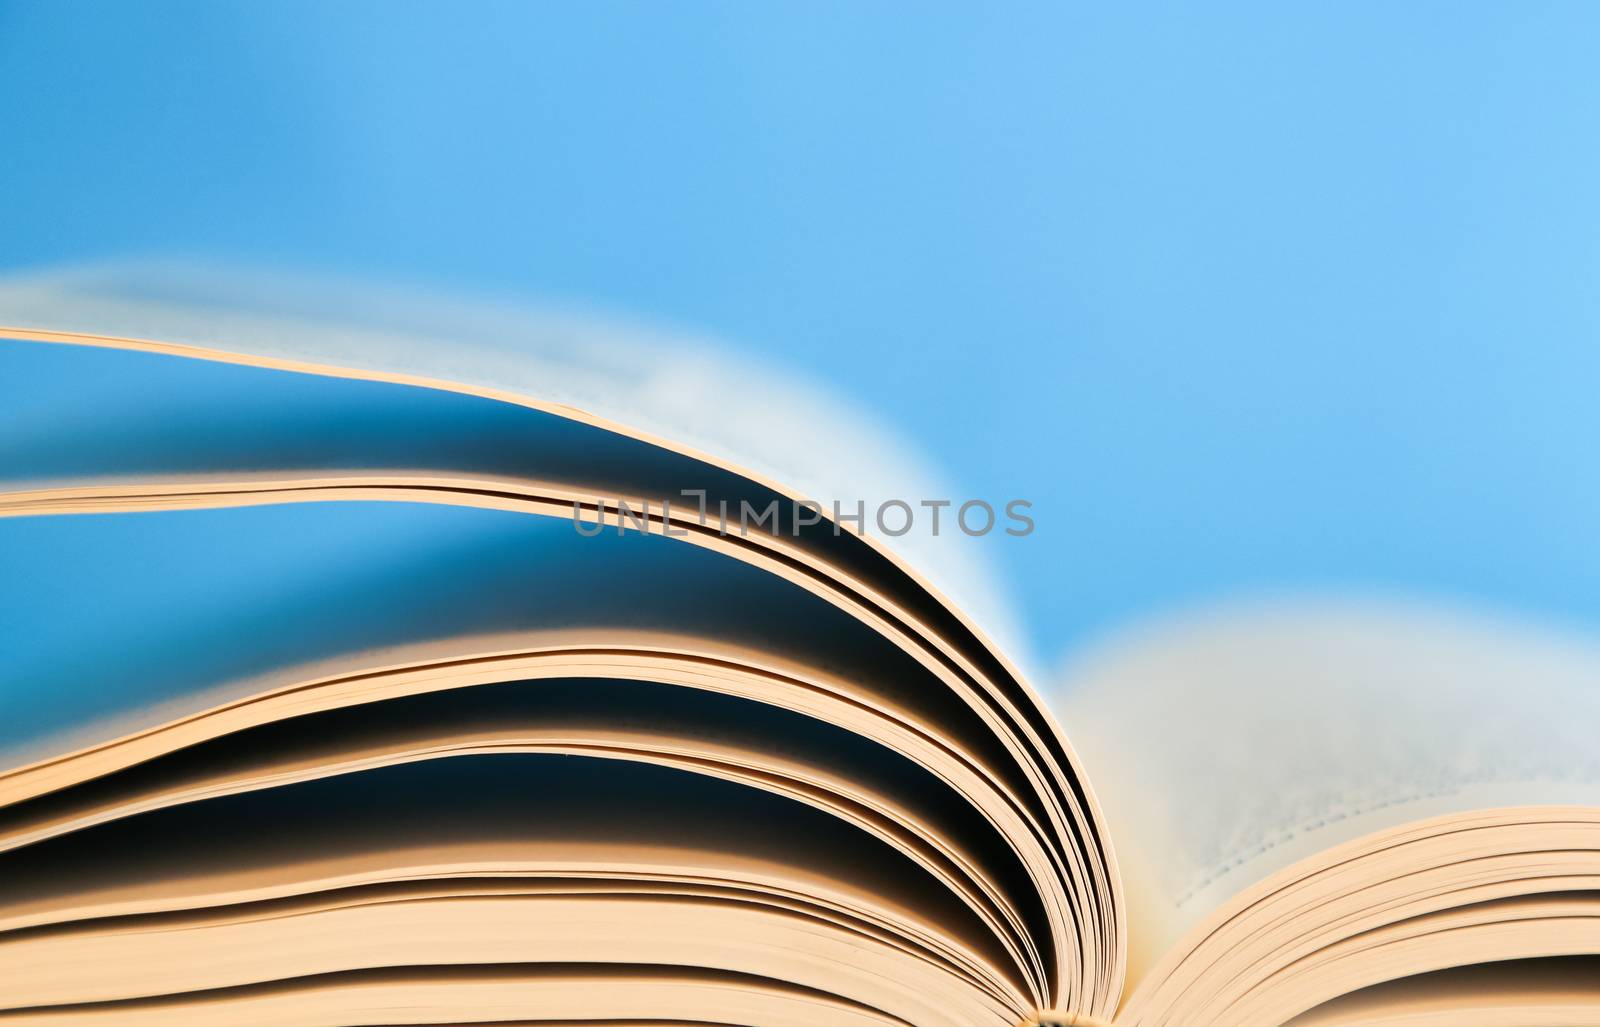 Blue background with pages of a book turning